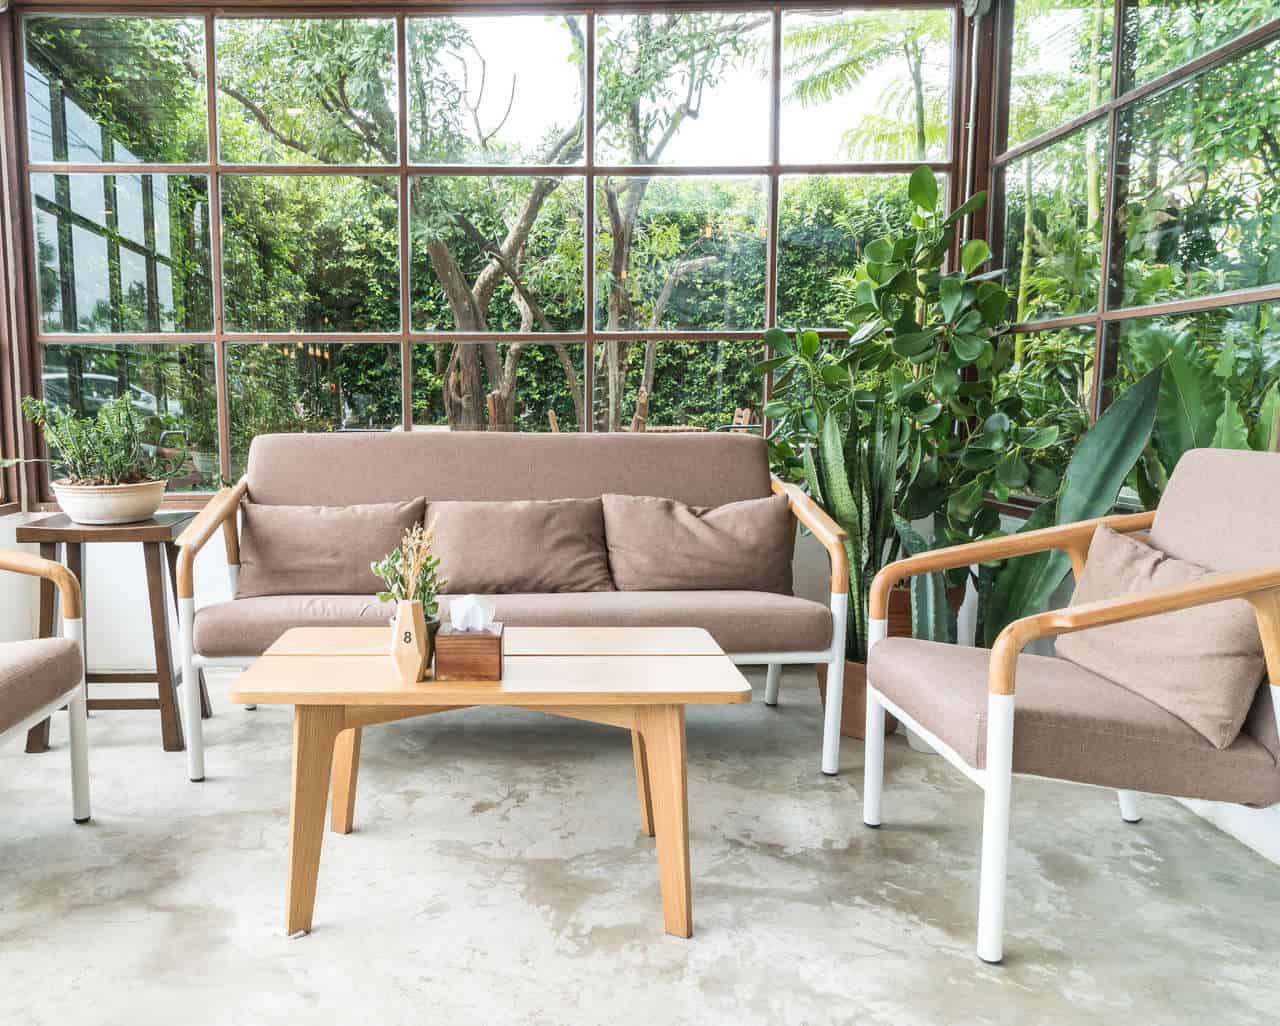 Furniture that works on a large patio